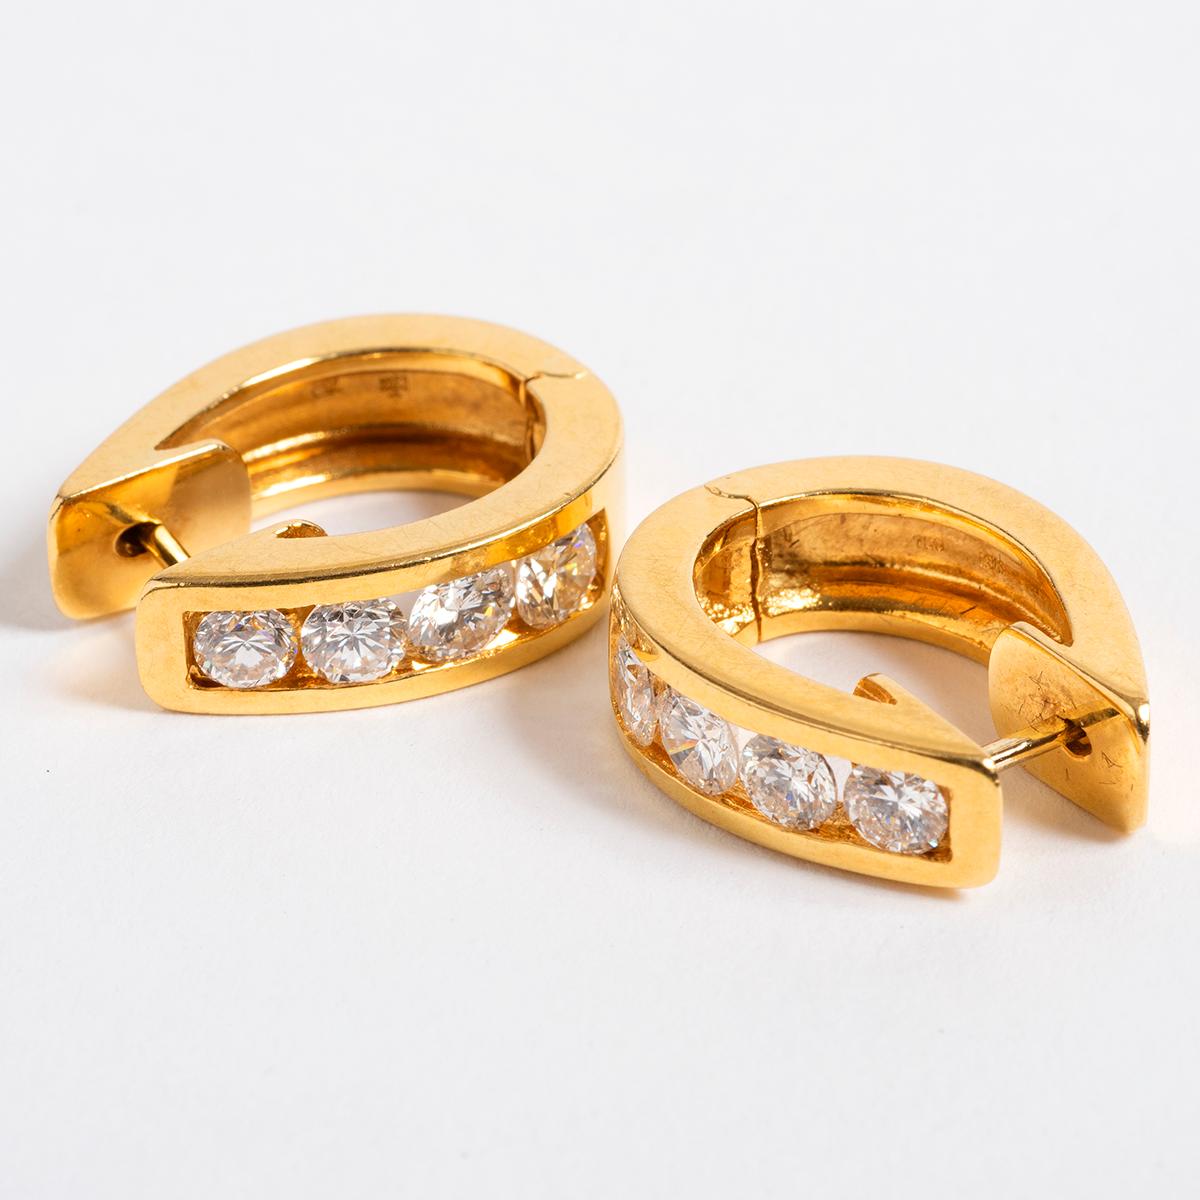 A unique piece within our carefully curated Vintage & Prestige fine jewellery collection, we are delighted to present the following:

Our prominent creole cuff earrings in 18k yellow gold measure 2cm x 1.5cm x .5cm feature set 1.6ct of fiery est. F